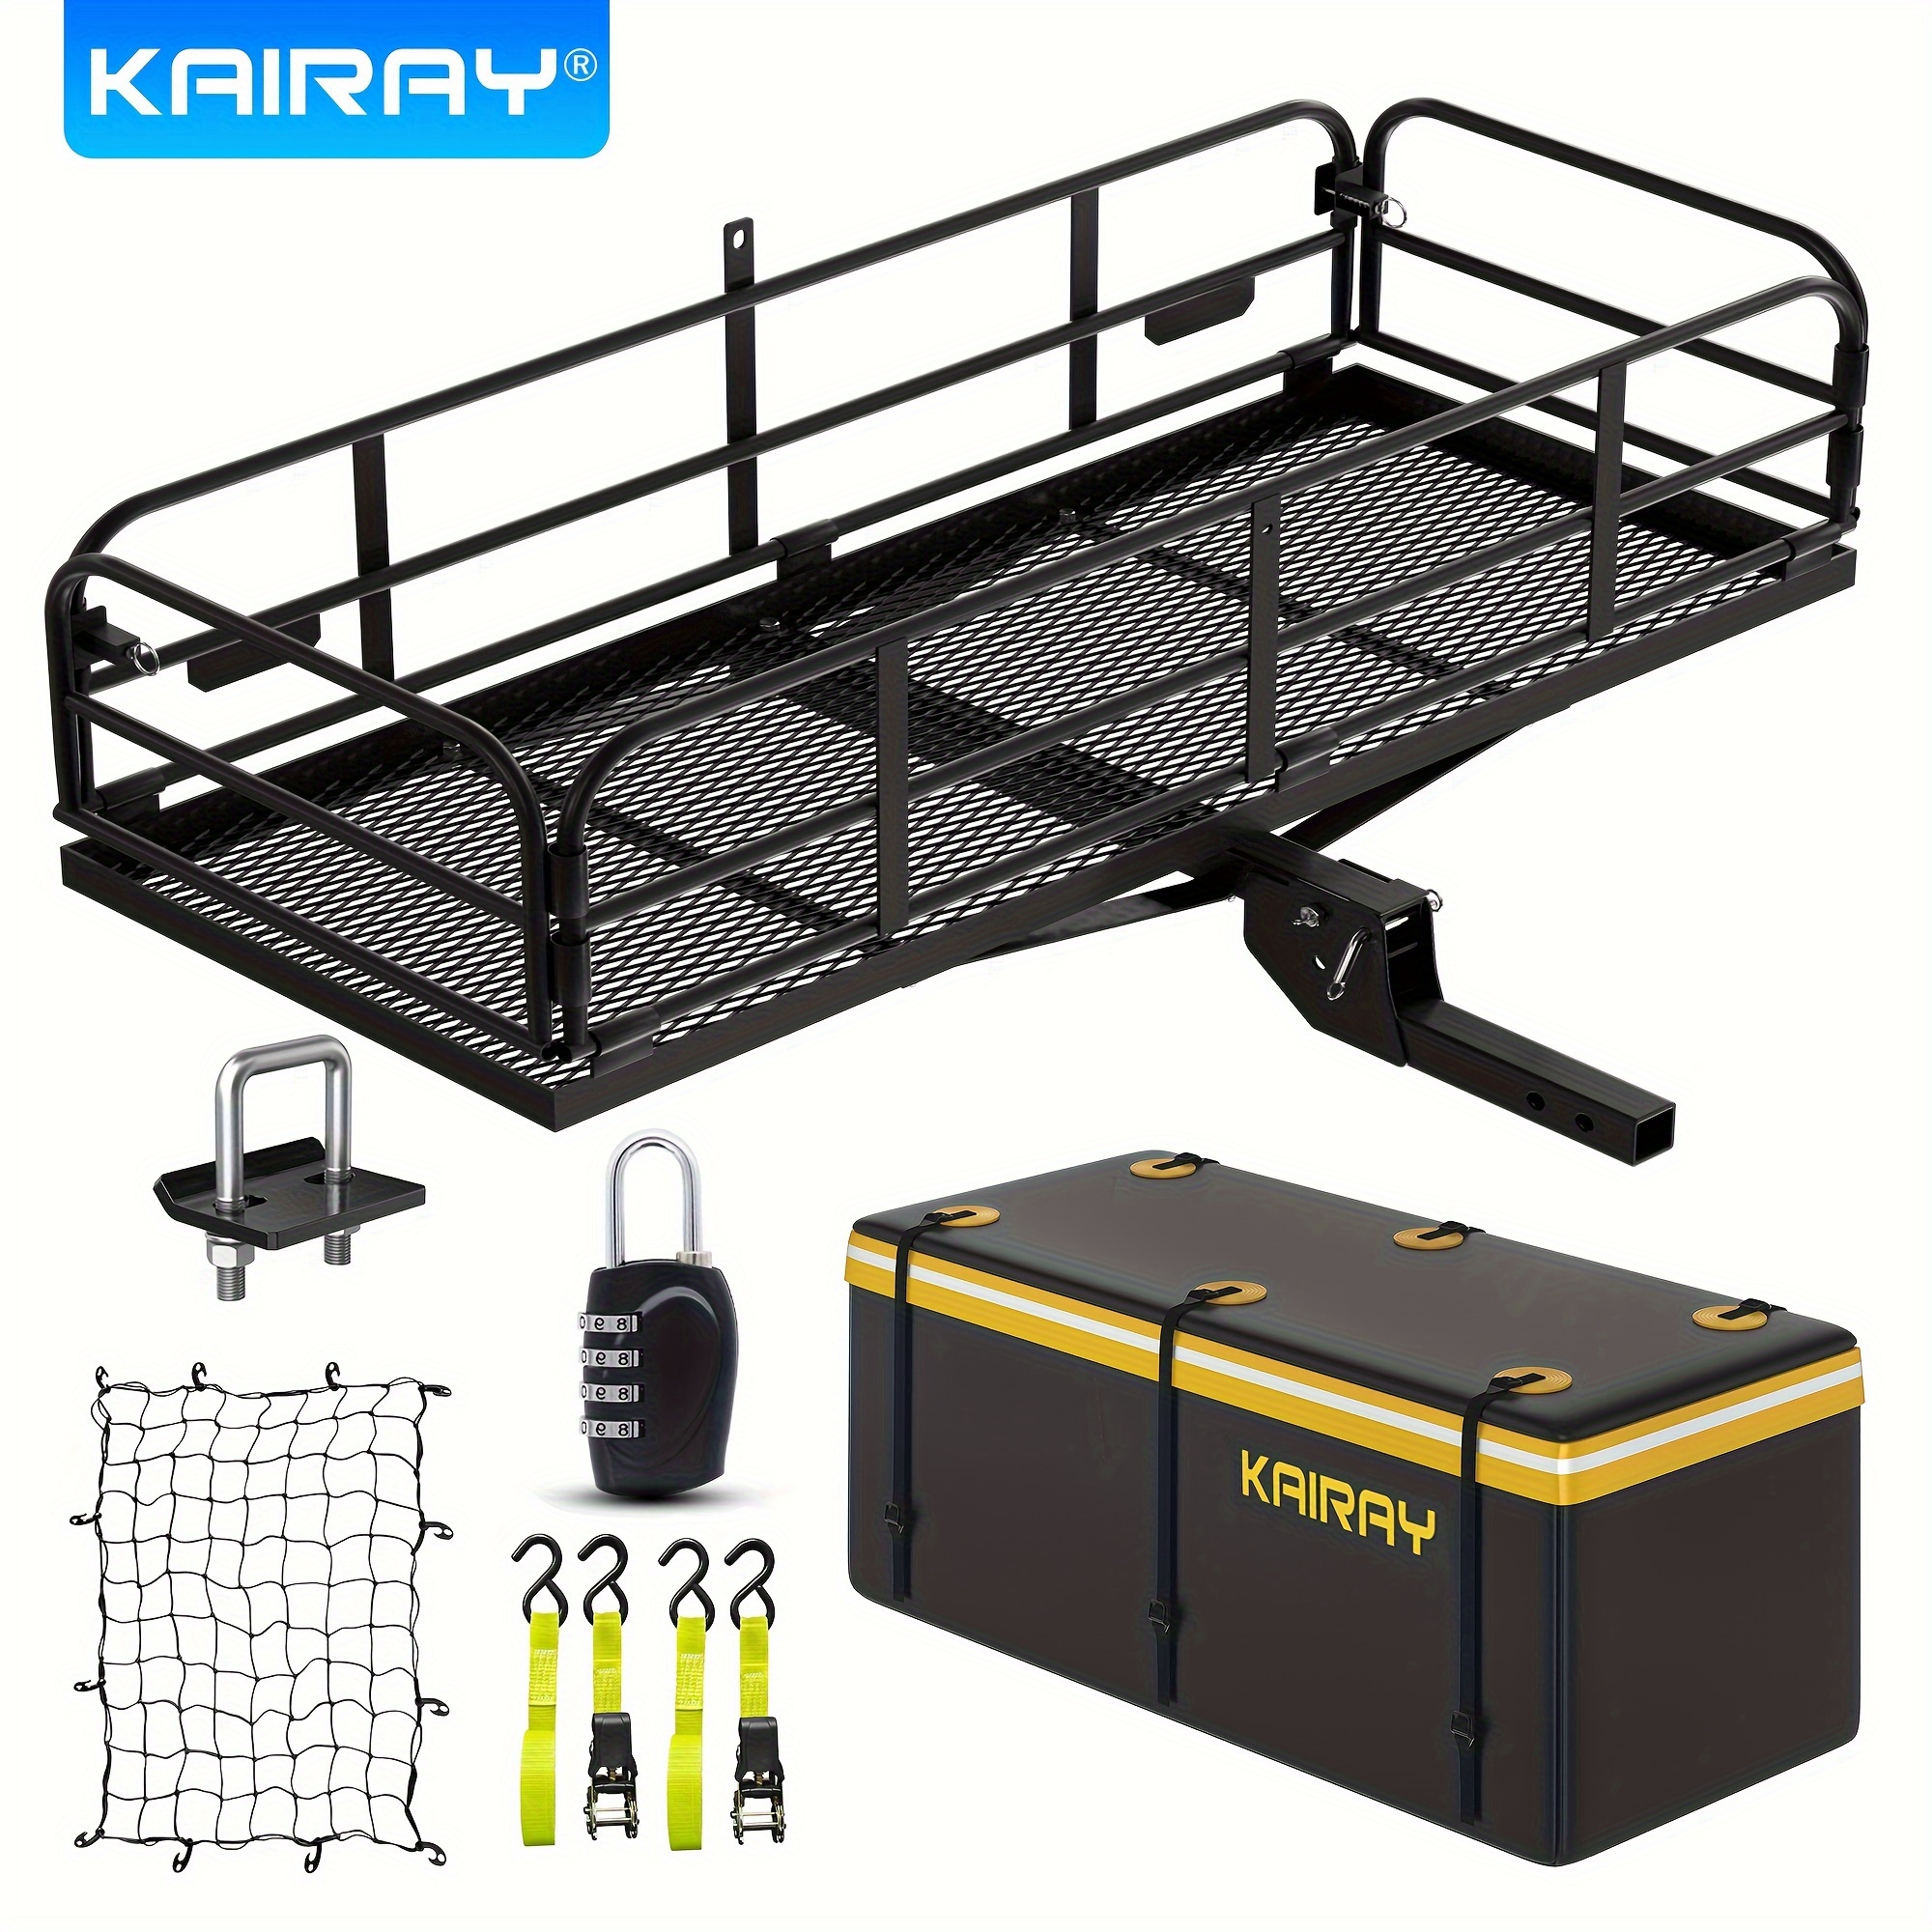 

Kairay 500 Lbs Heavy Duty Hitch Mount Cargo Carrier 60" X 24" X 14.4"/ 152.4cm X 61cm X 36.5cm Folding Cargo Rack Rear Luggage Basket Fits Any Standard 2" Hitch Receiver For Car Suv Camping Traveling